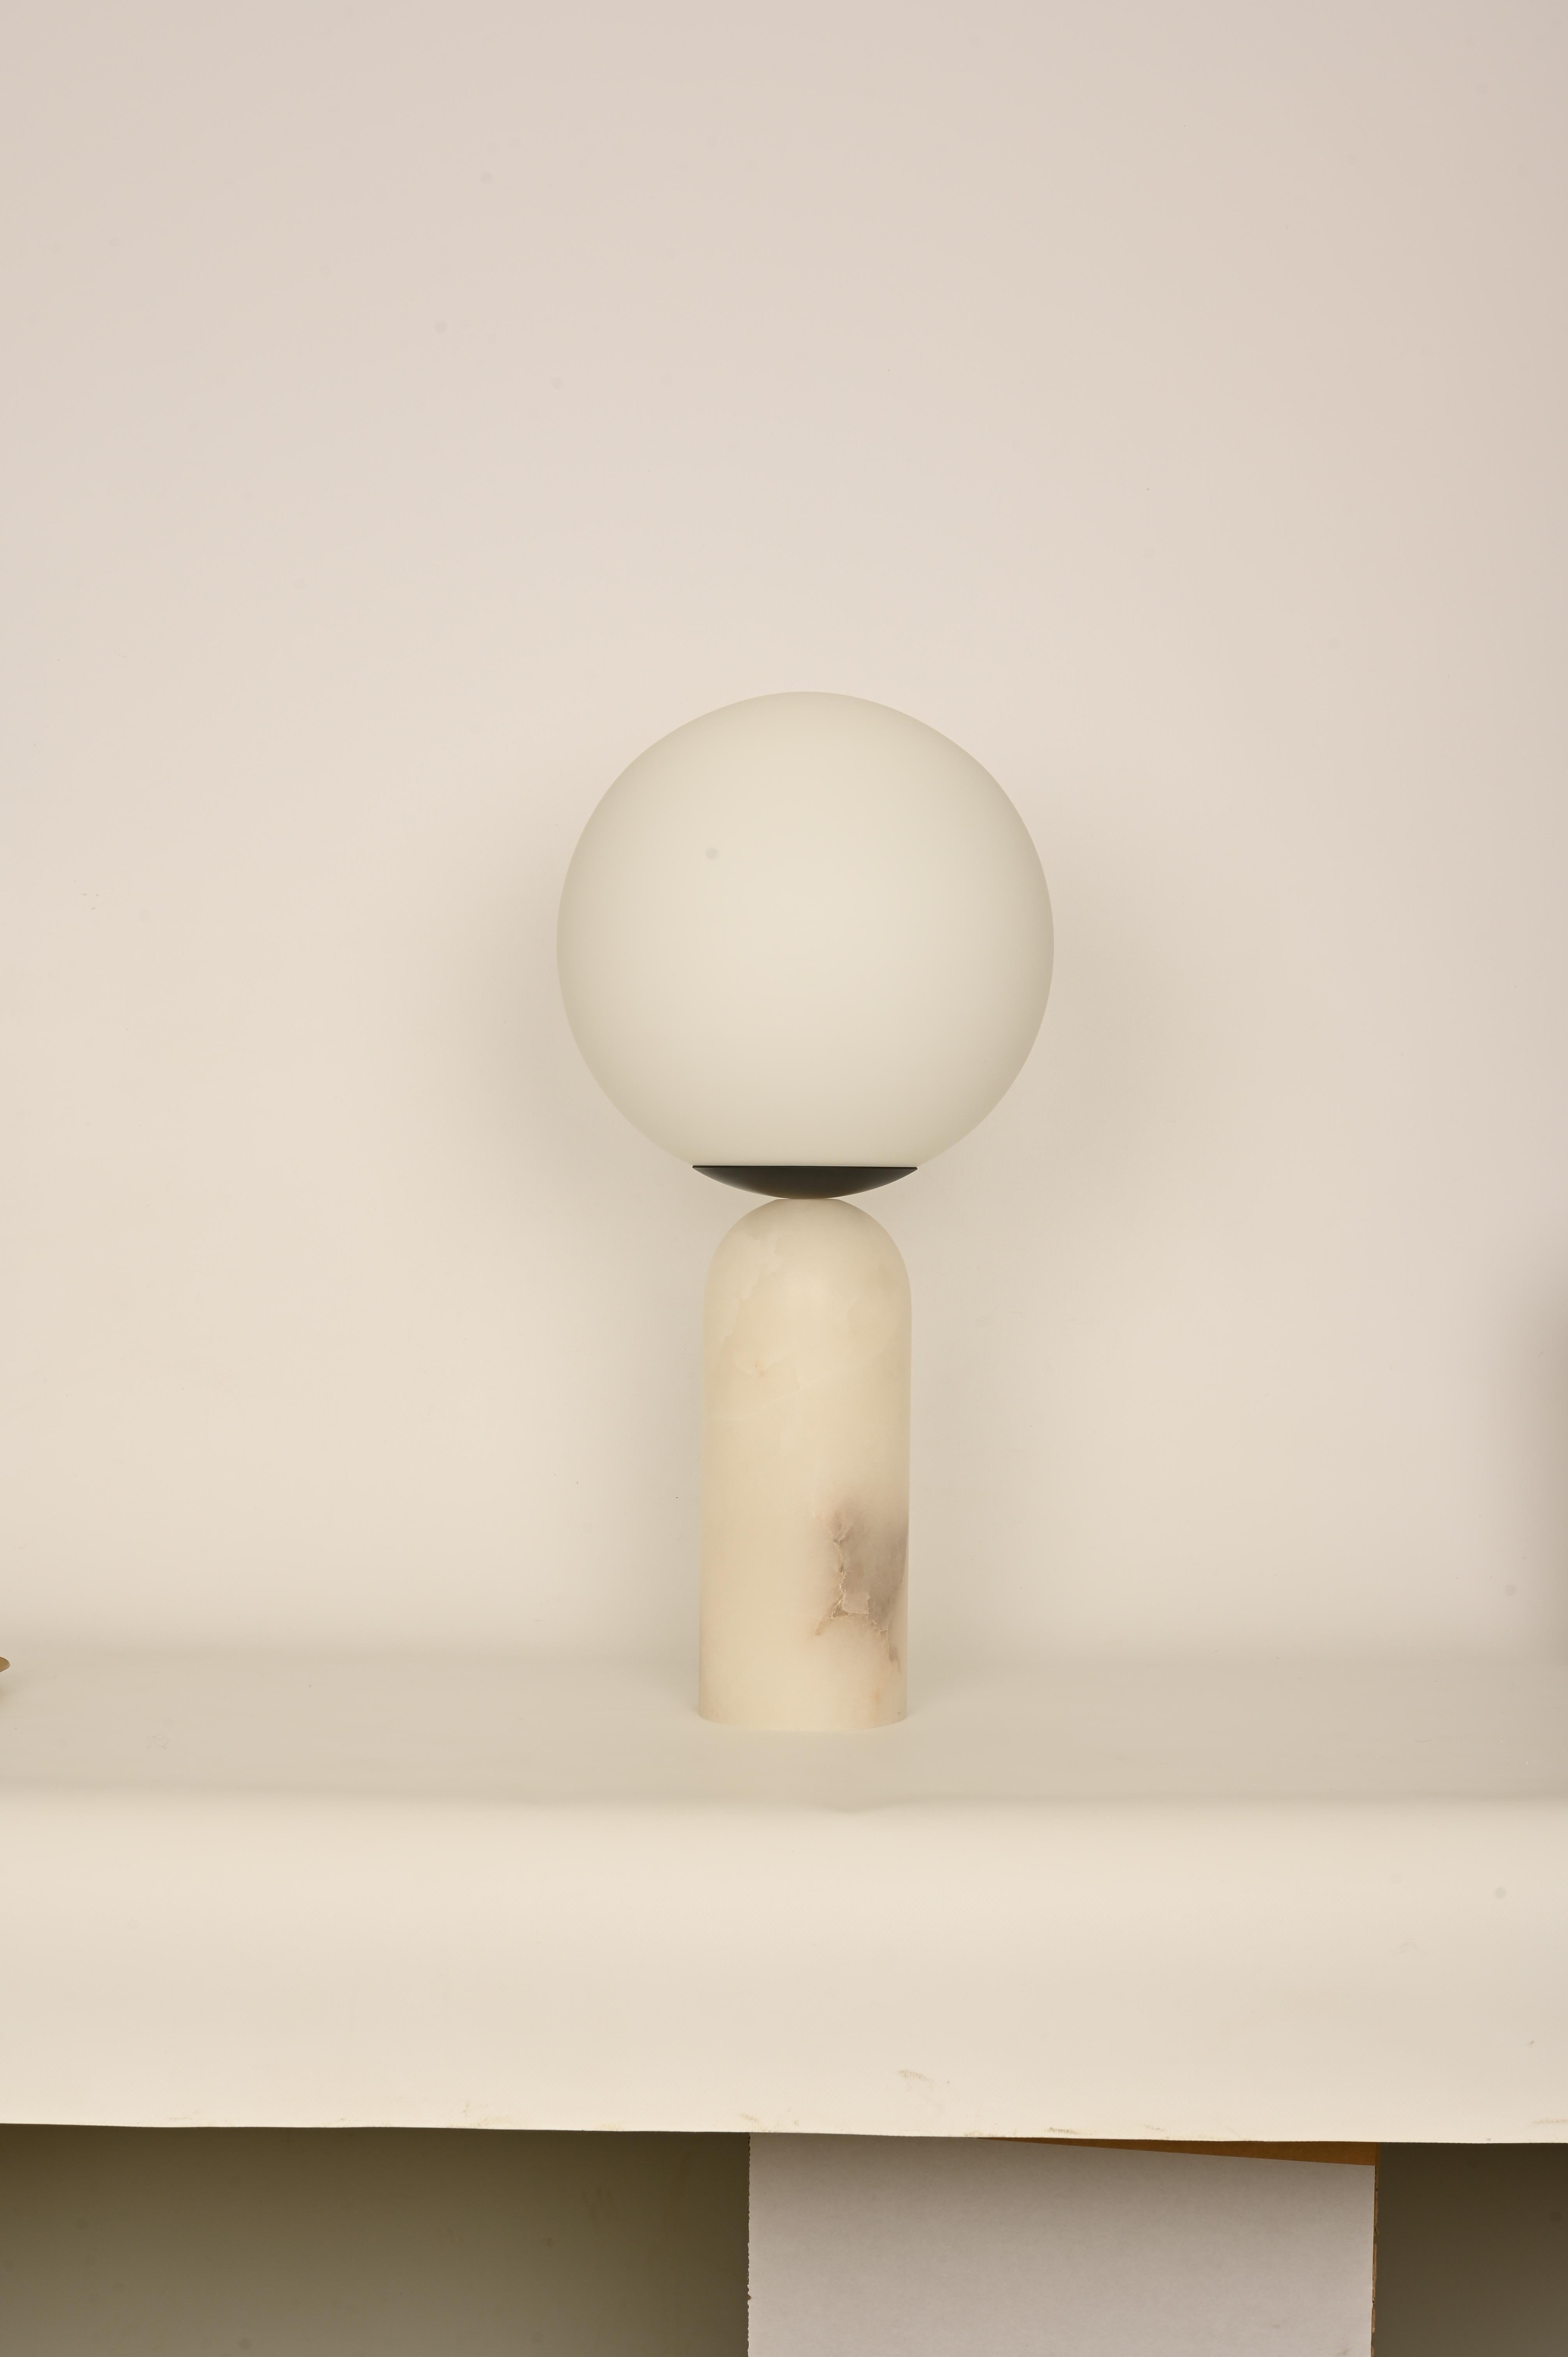 White Alabaster and Steel Atlas Table Lamp by Simone & Marcel
Dimensions: Ø 30 x H 60 cm.
Materials: Glass, blackened steel and white alabaster.

Also available in different marble, wood and alabaster options and finishes. Custom options available